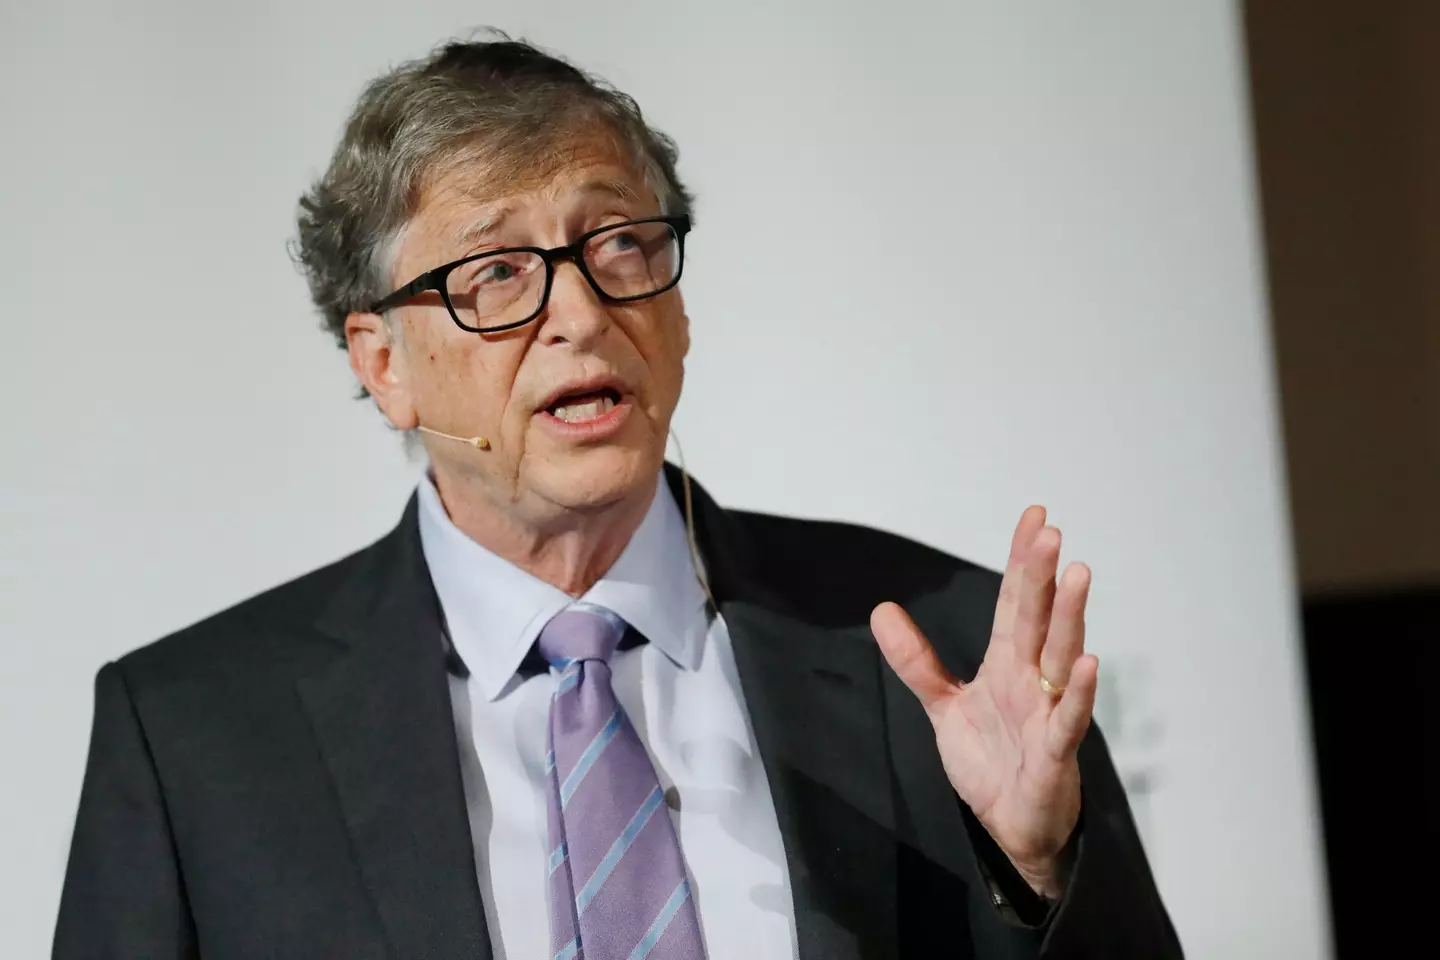 Microsoft co-founder Bill Gates dropped out of college.